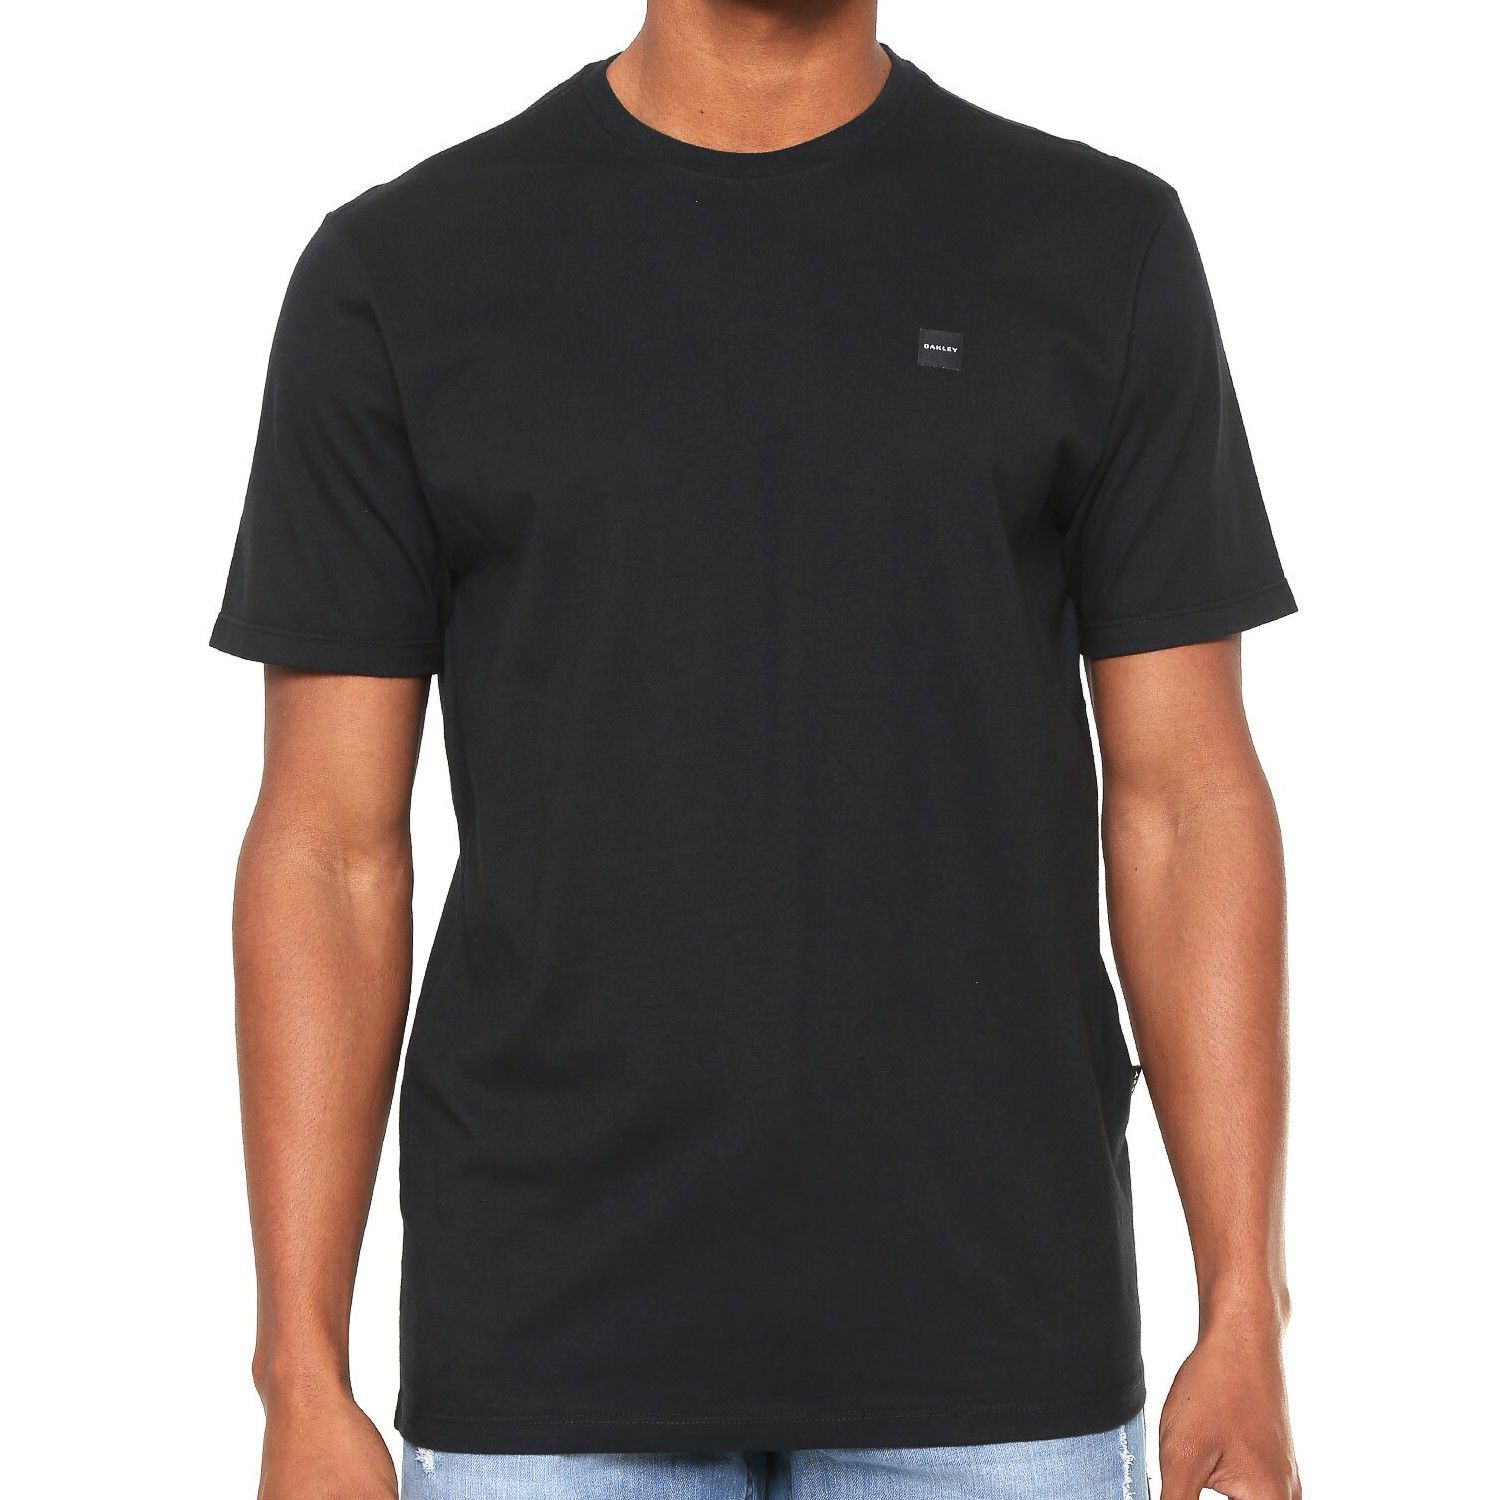 Camiseta Oakley Patch Tee Masculina - 457294br-40l